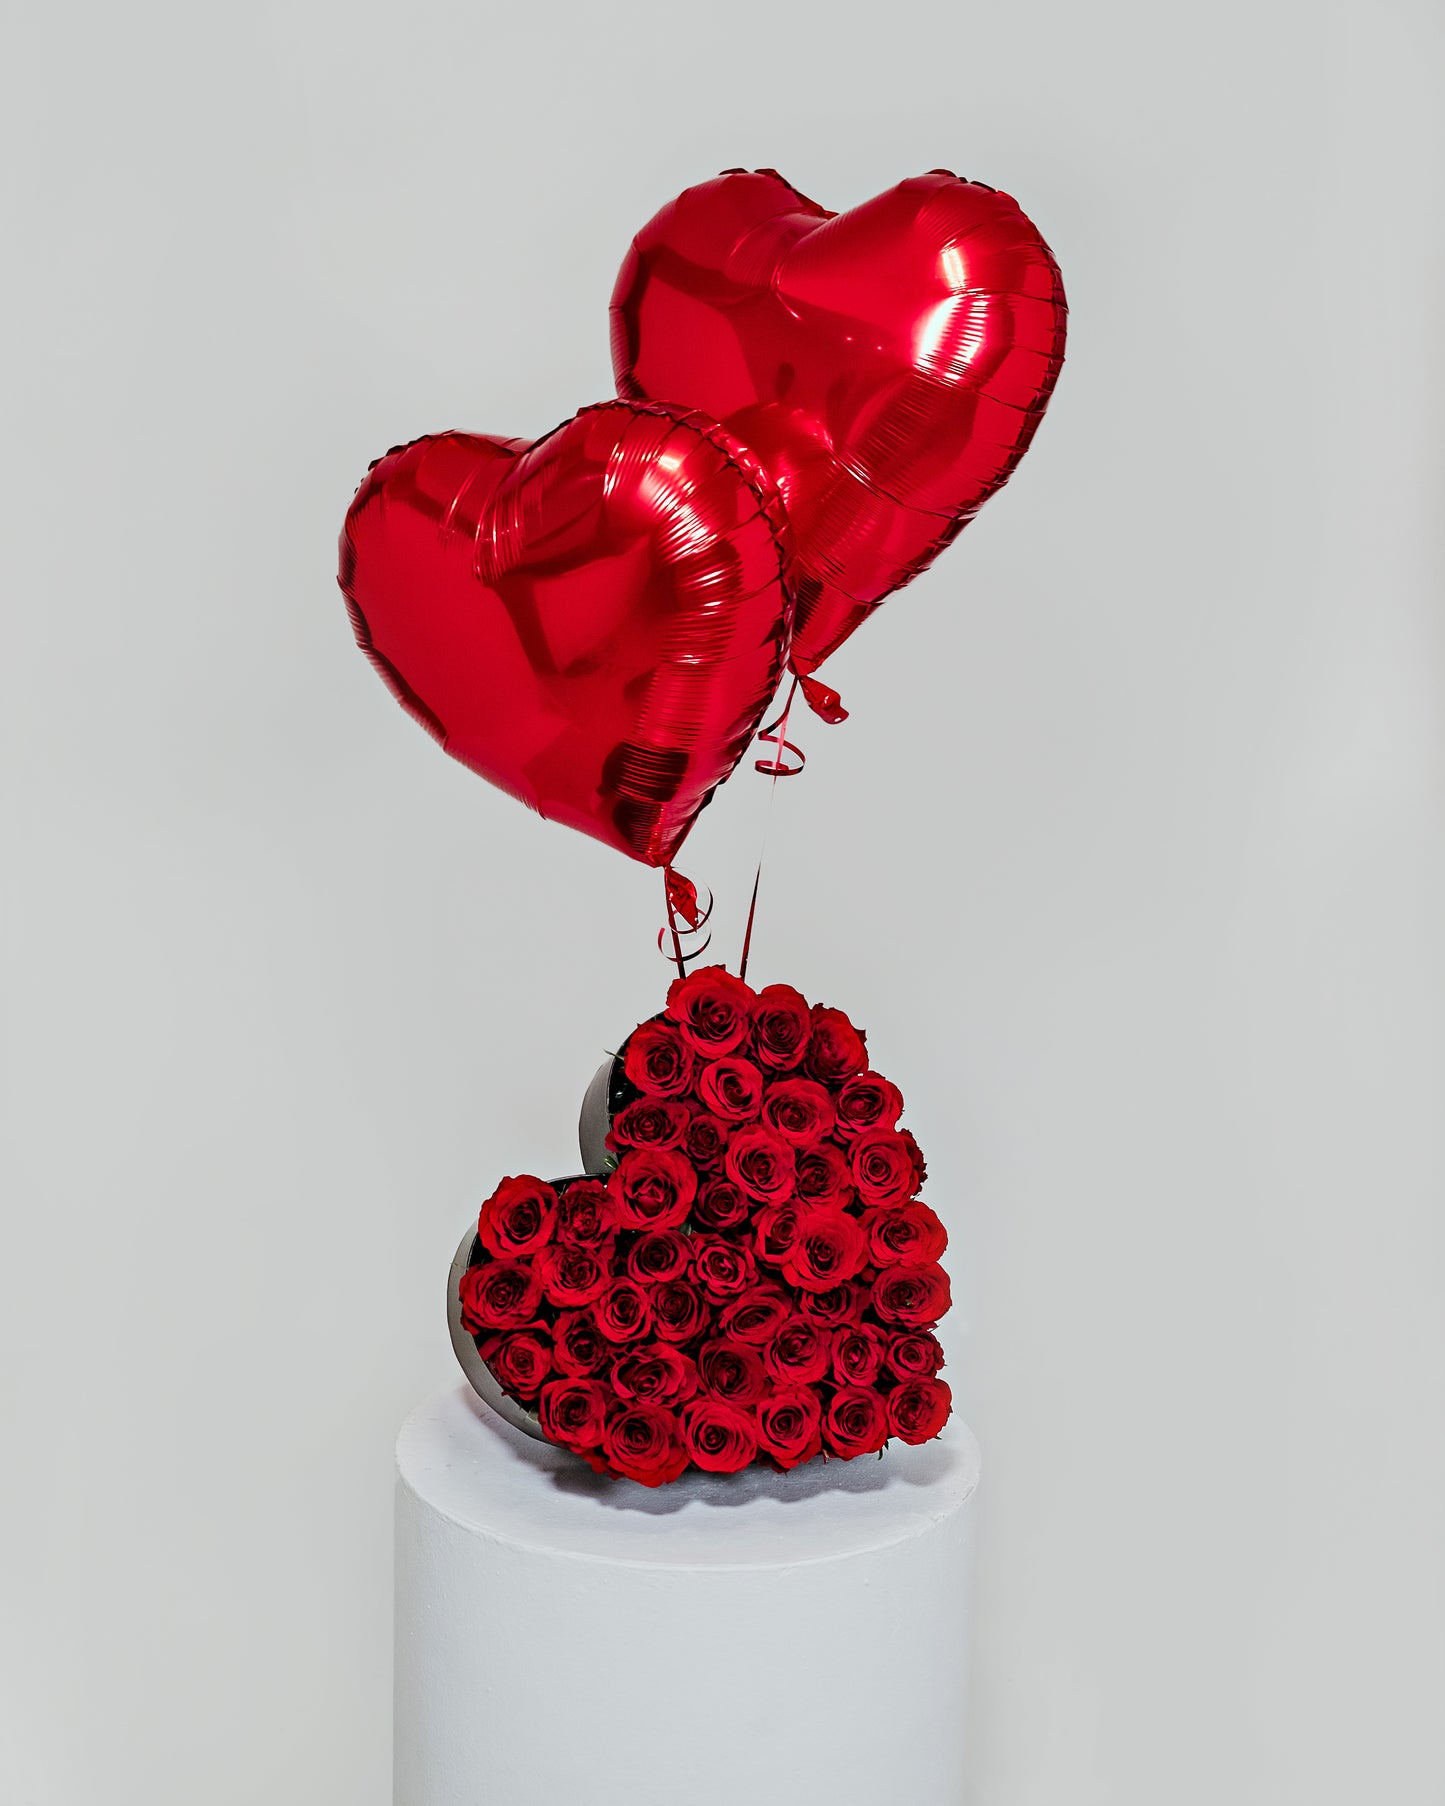 A large, striking heart-shaped arrangement formed with lush red roses and accented with heart-shaped balloons, a grand declaration of love for Valentine's Day.